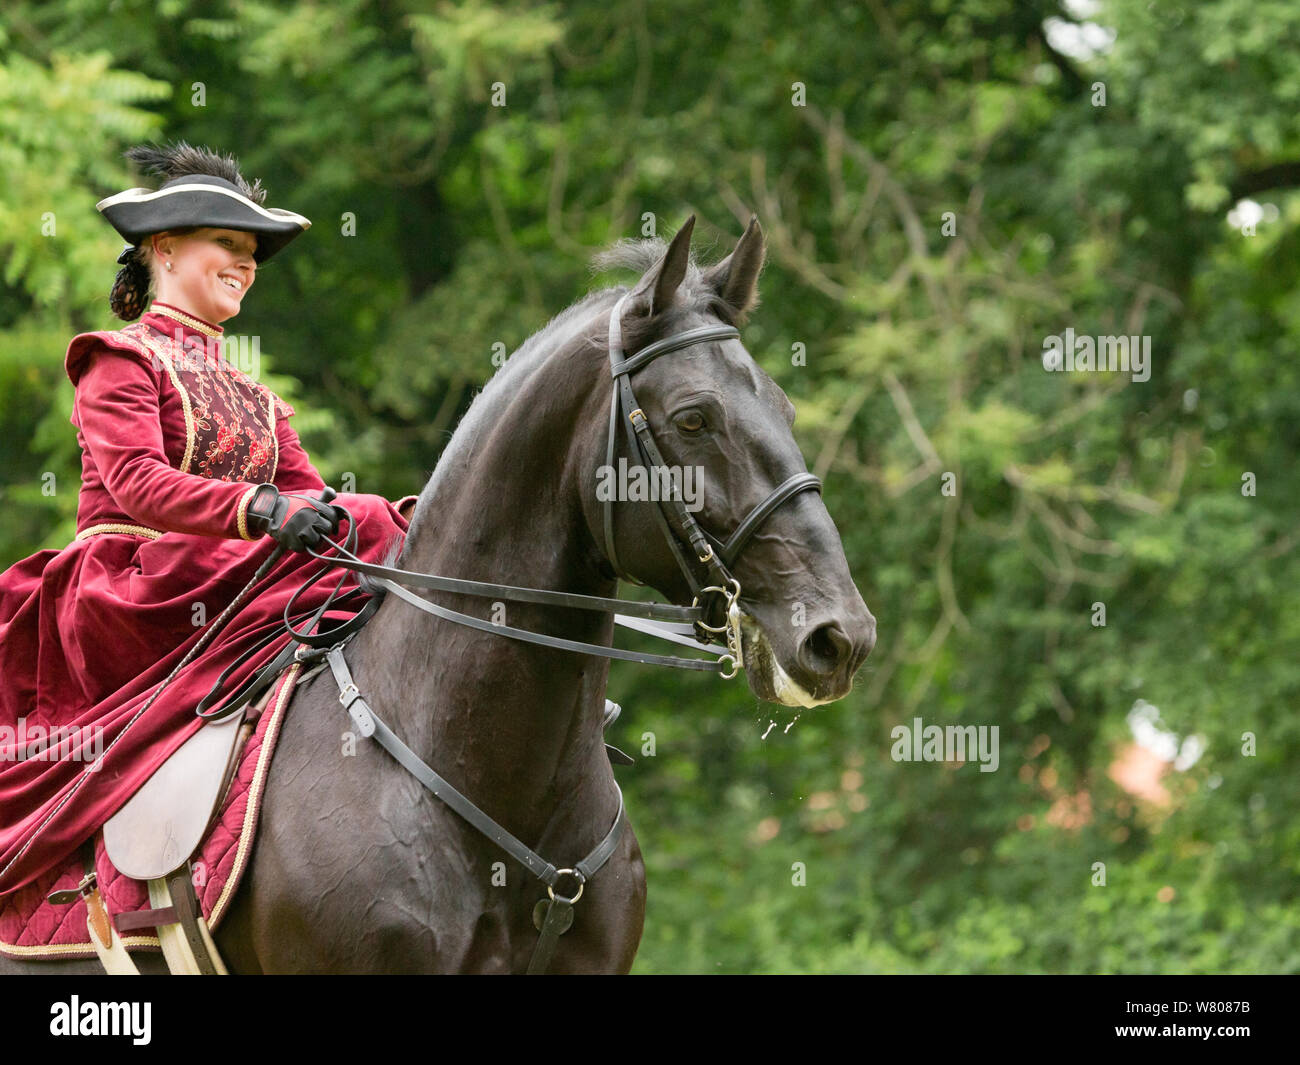 Lady dressed in period costume, rides side saddle a rare black Kladruber horse/stallion, at the Great Riding festival, in Slatinany national stud, Pardubice Region, Czech Republic. June 2015. Stock Photo